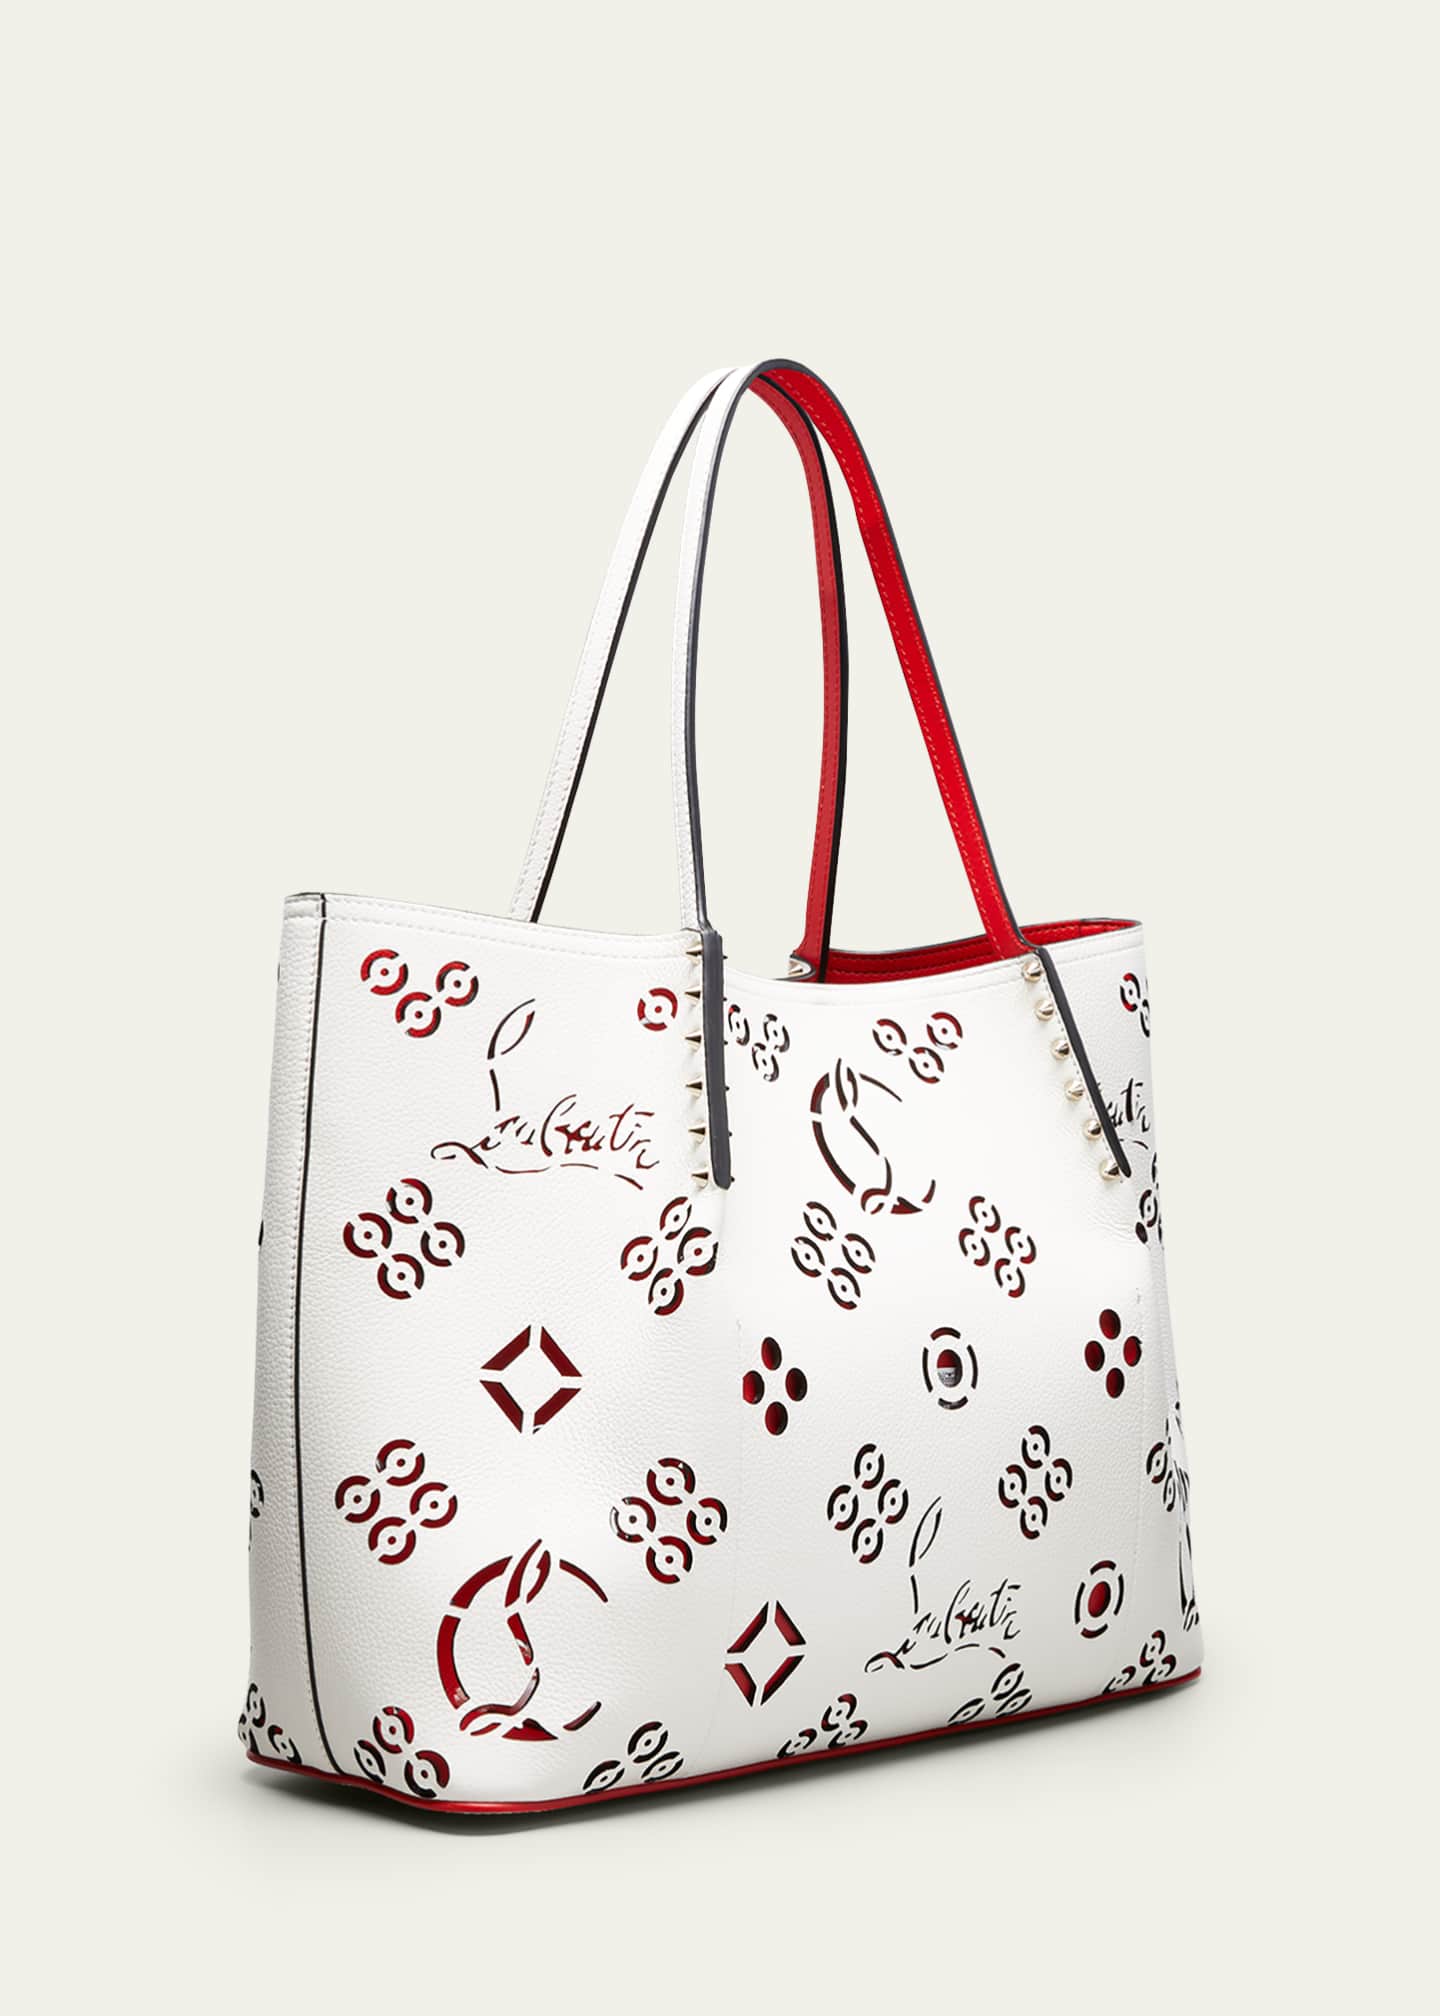 Christian Louboutin Cabarock Small Perforated Leather Tote Bag